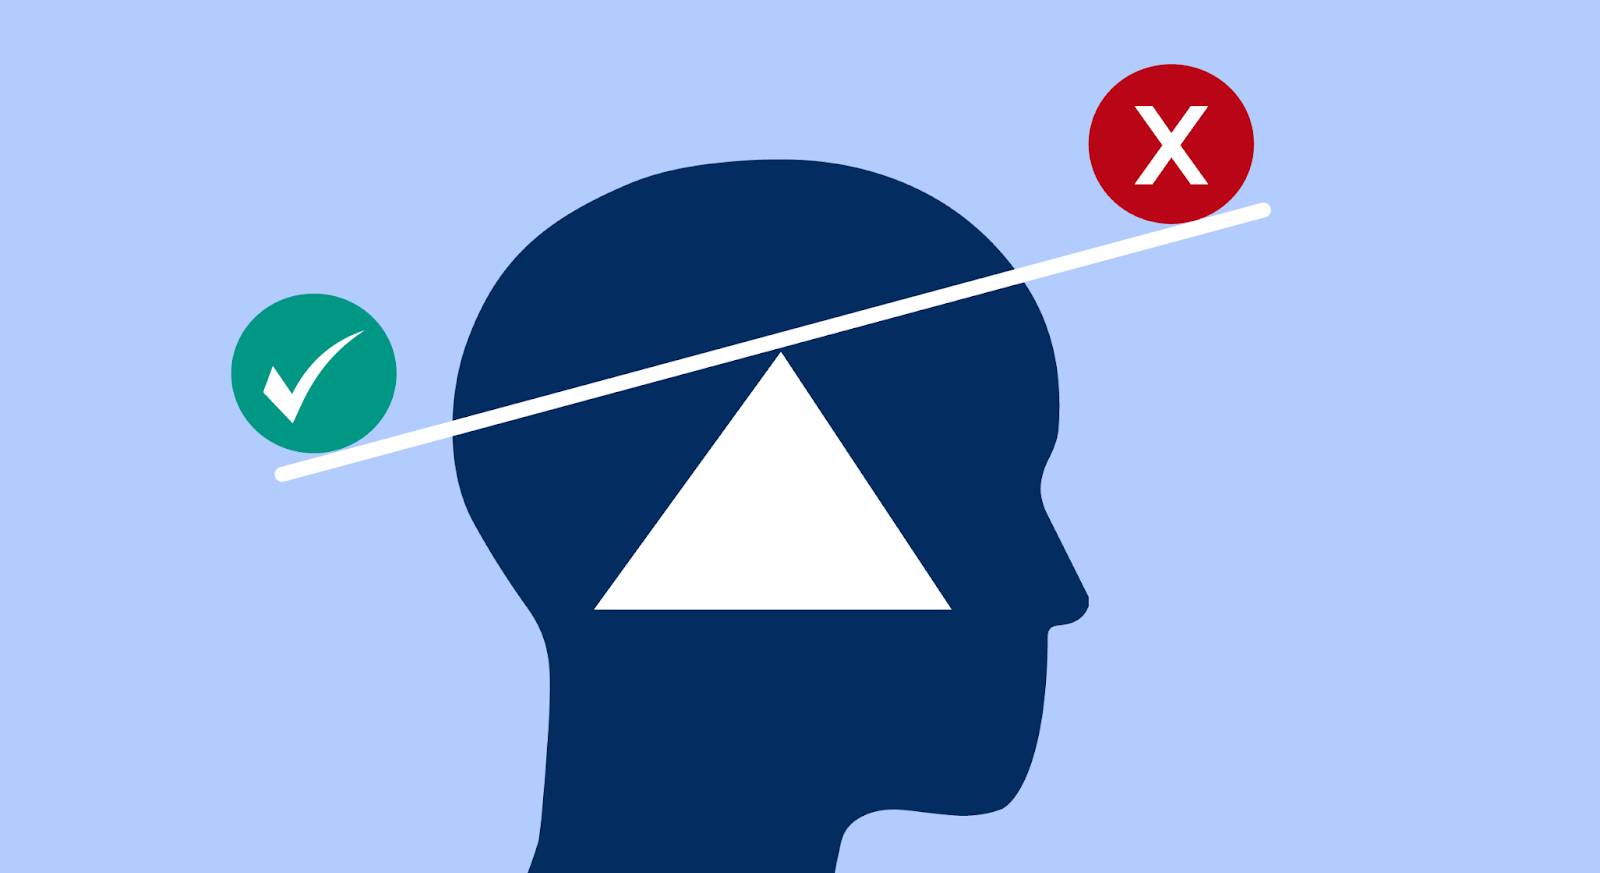 A scale balancing a checkmark and an X imposed over the silhouette of a head.